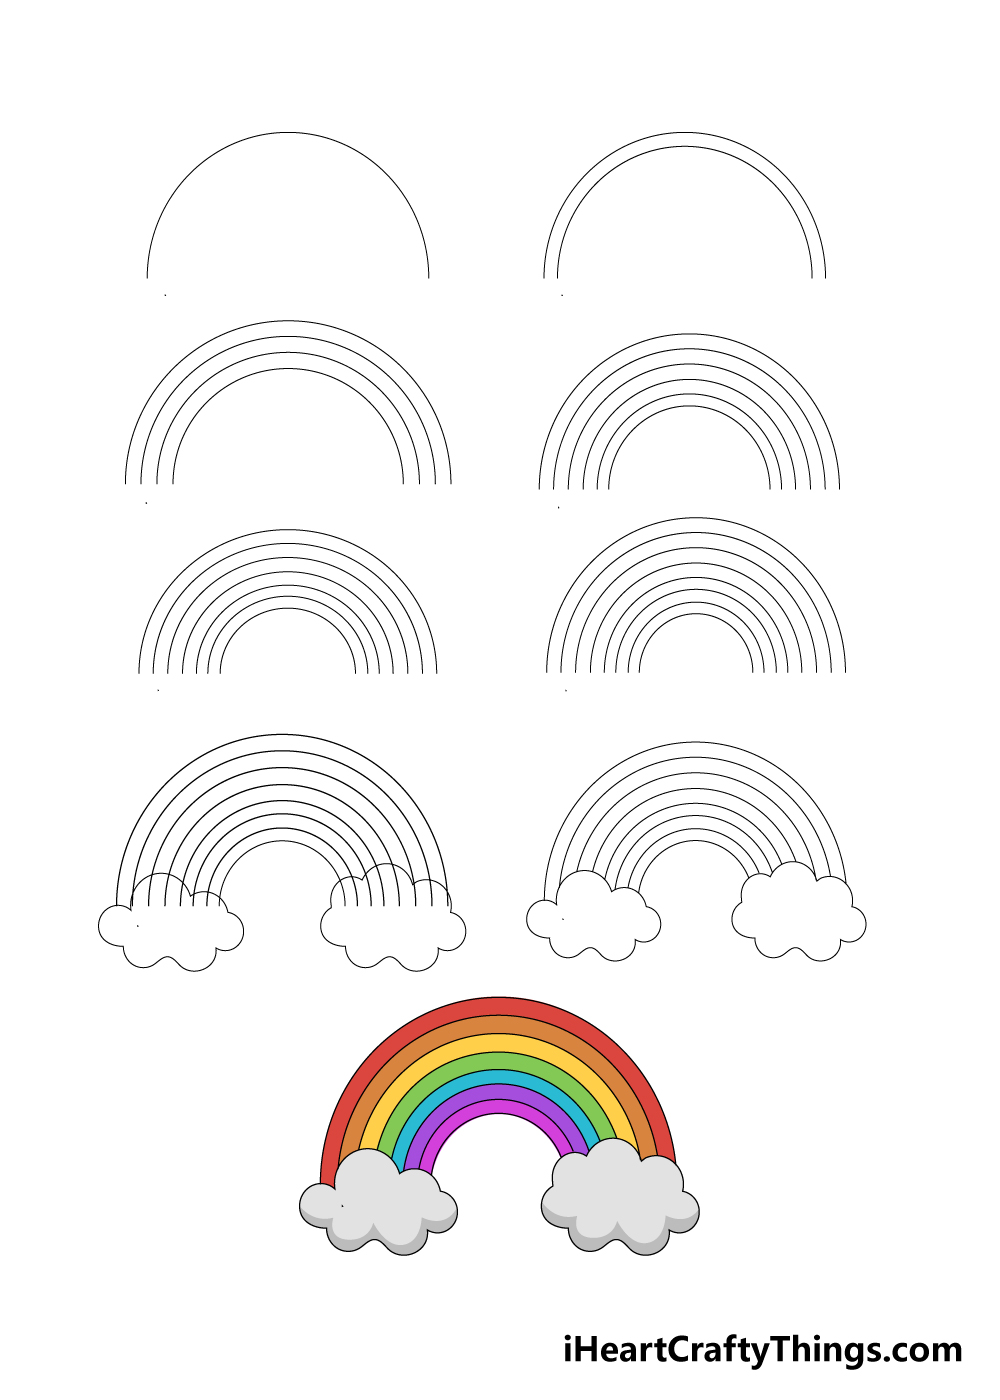 how to draw a rainbow in 9 steps